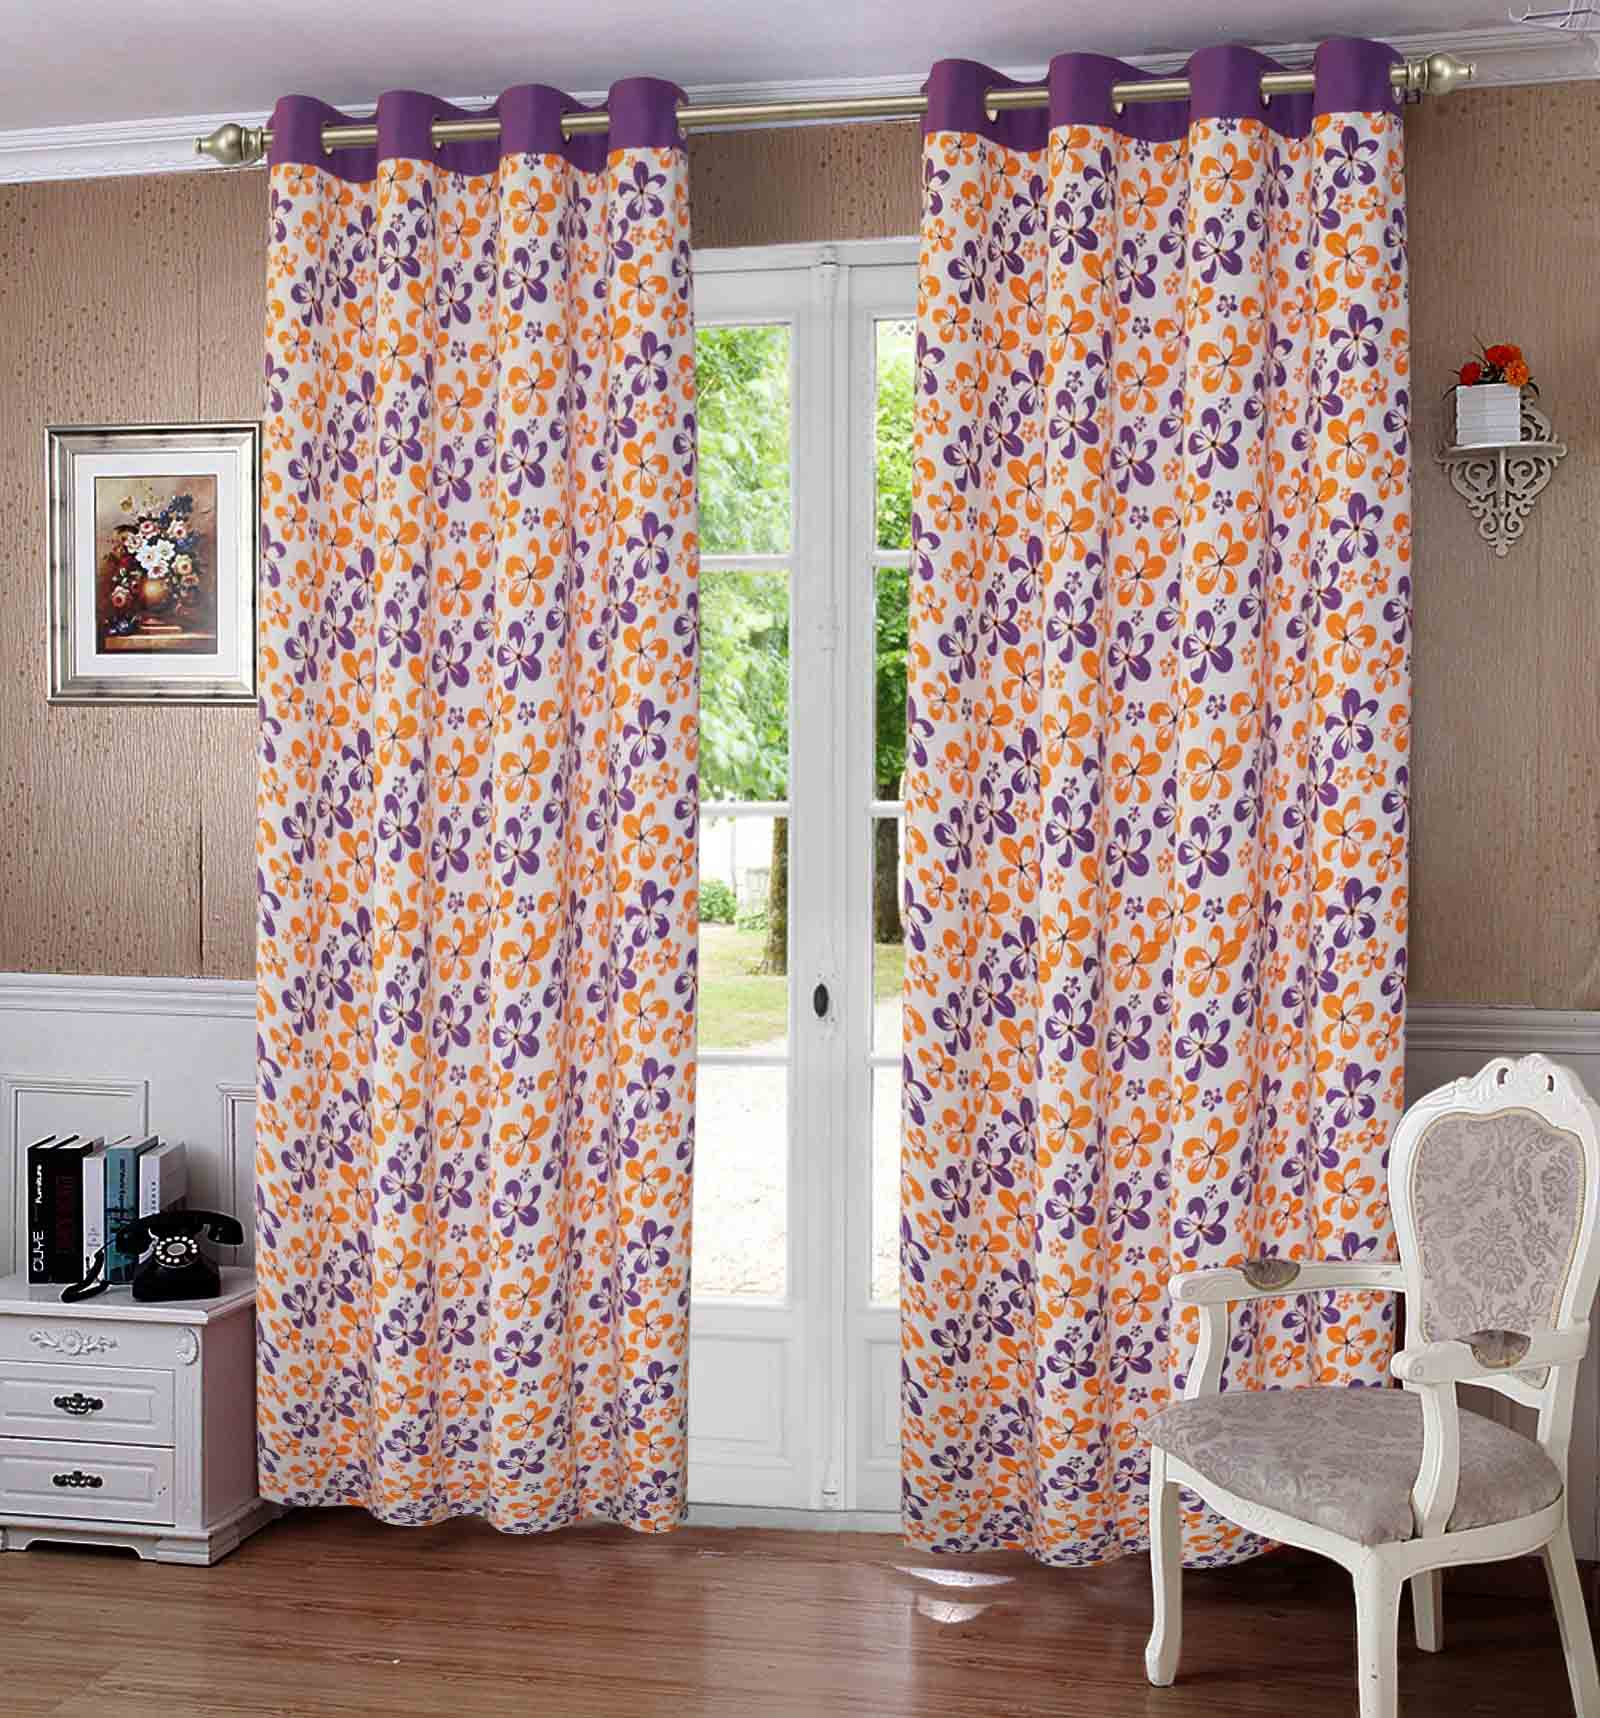 Lushomes Door Curtain, Purple Shadow Printed Cotton Curtains for Living Room/Home with 8 Eyelets & Printed Tiebacks, curtains 9 feet long, (54x108 Inches, Set of 1)